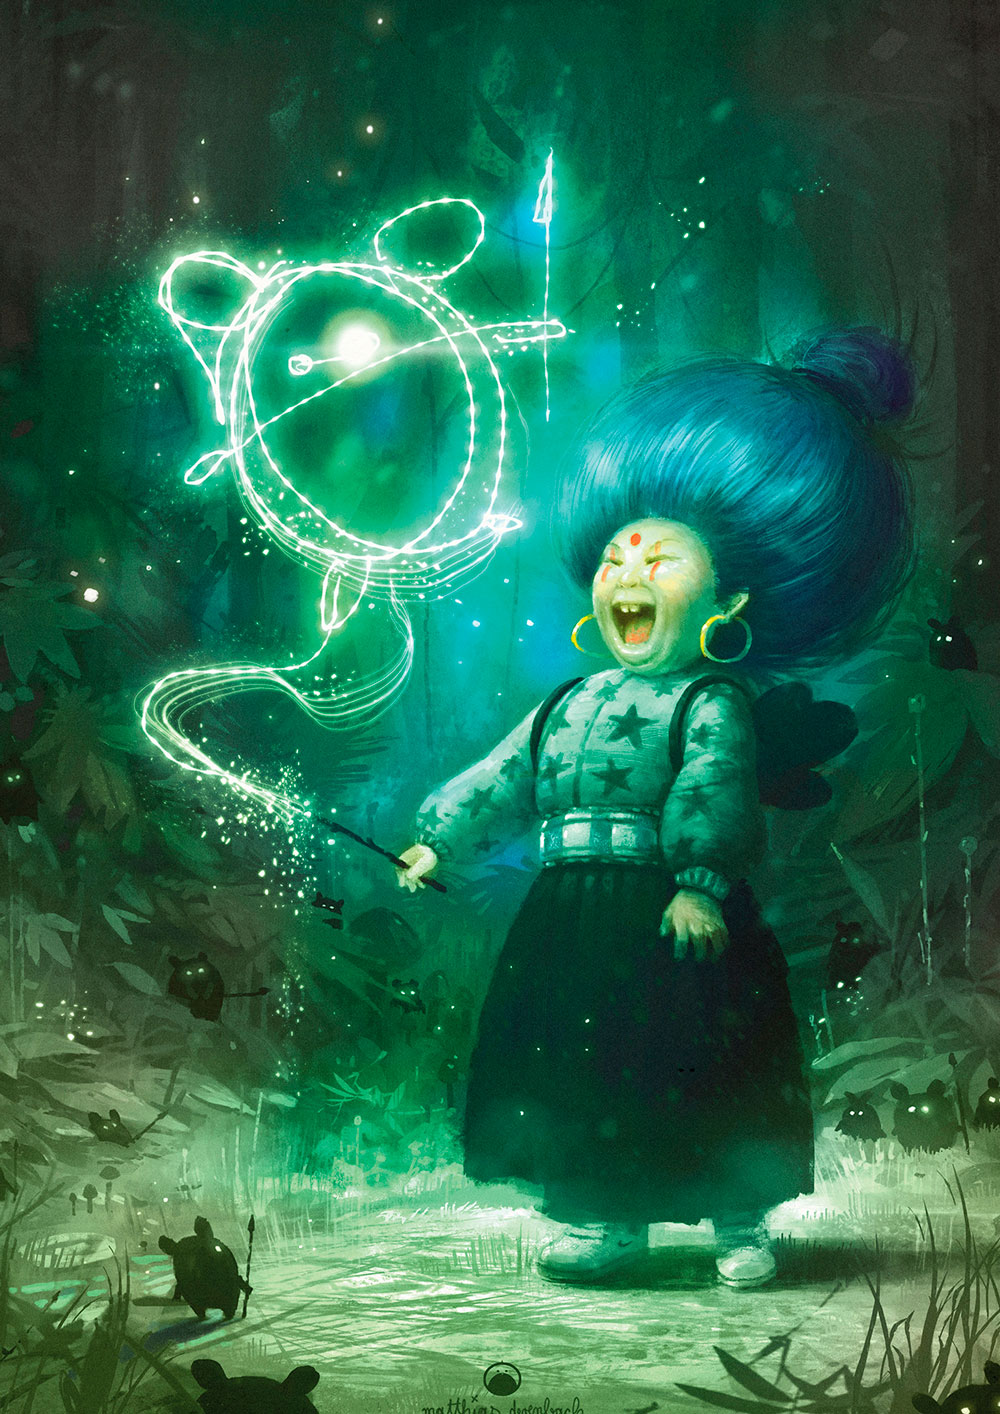 Digital artwork titled 'Crazy Witch'. Drawing of a laughing witch, standing in the forest and tracing the little creature in front of her with her magic wand in the air. Green tones create a mystical mood - by Matthias Derenbach